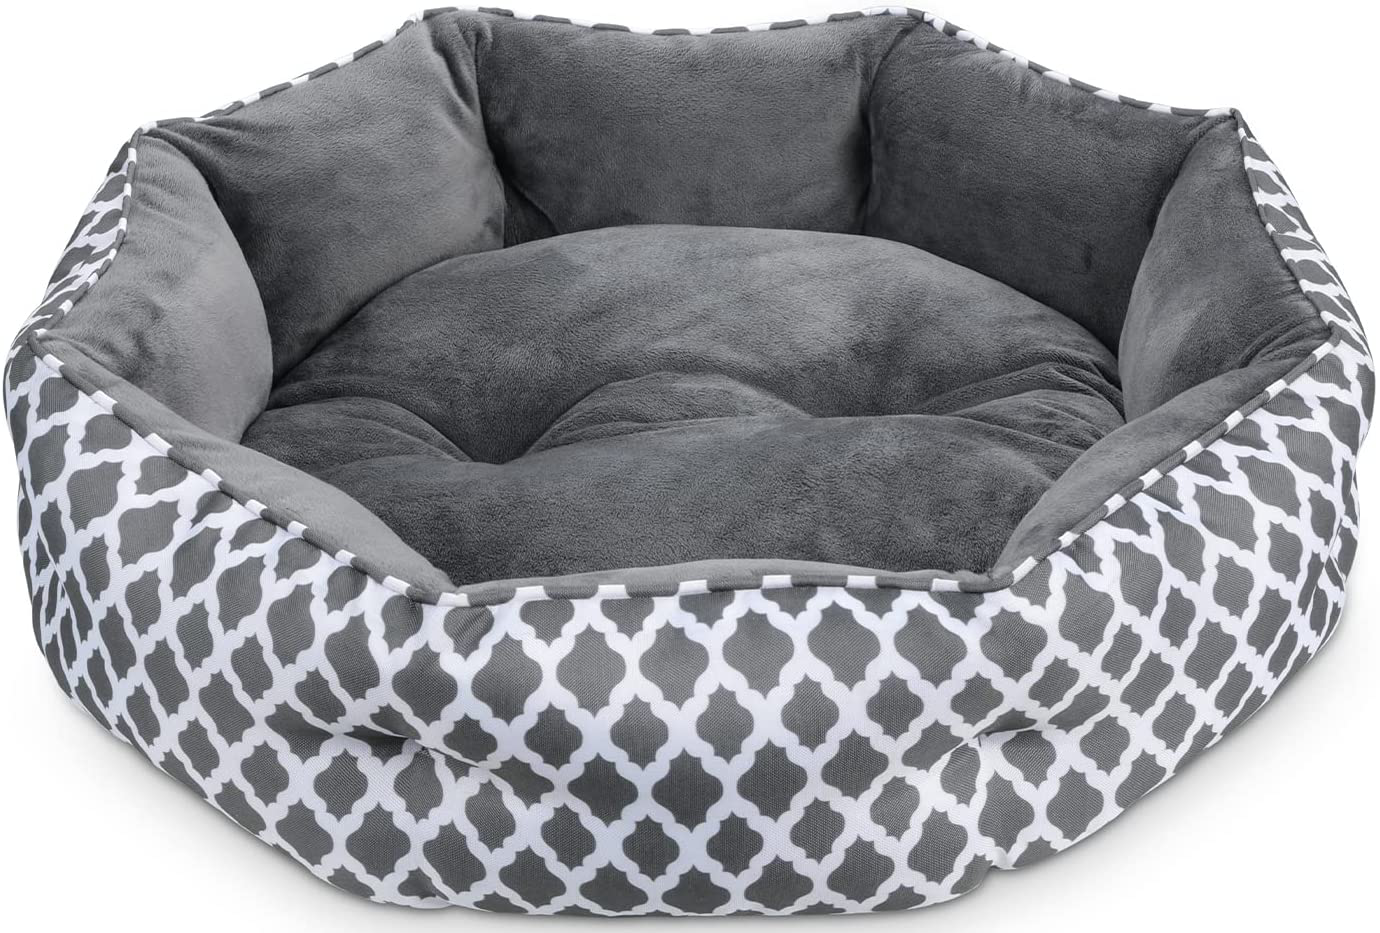 JOYO Cat Bed for Indoor Cats, Small Dog Bed for Small Dogs, round Plush Cat Bed with Waterproof Non-Slip Bottom, Double-Sided Soft Flannel Kitten Cushion Bed for Kittens, Kitty Self Warming Bed